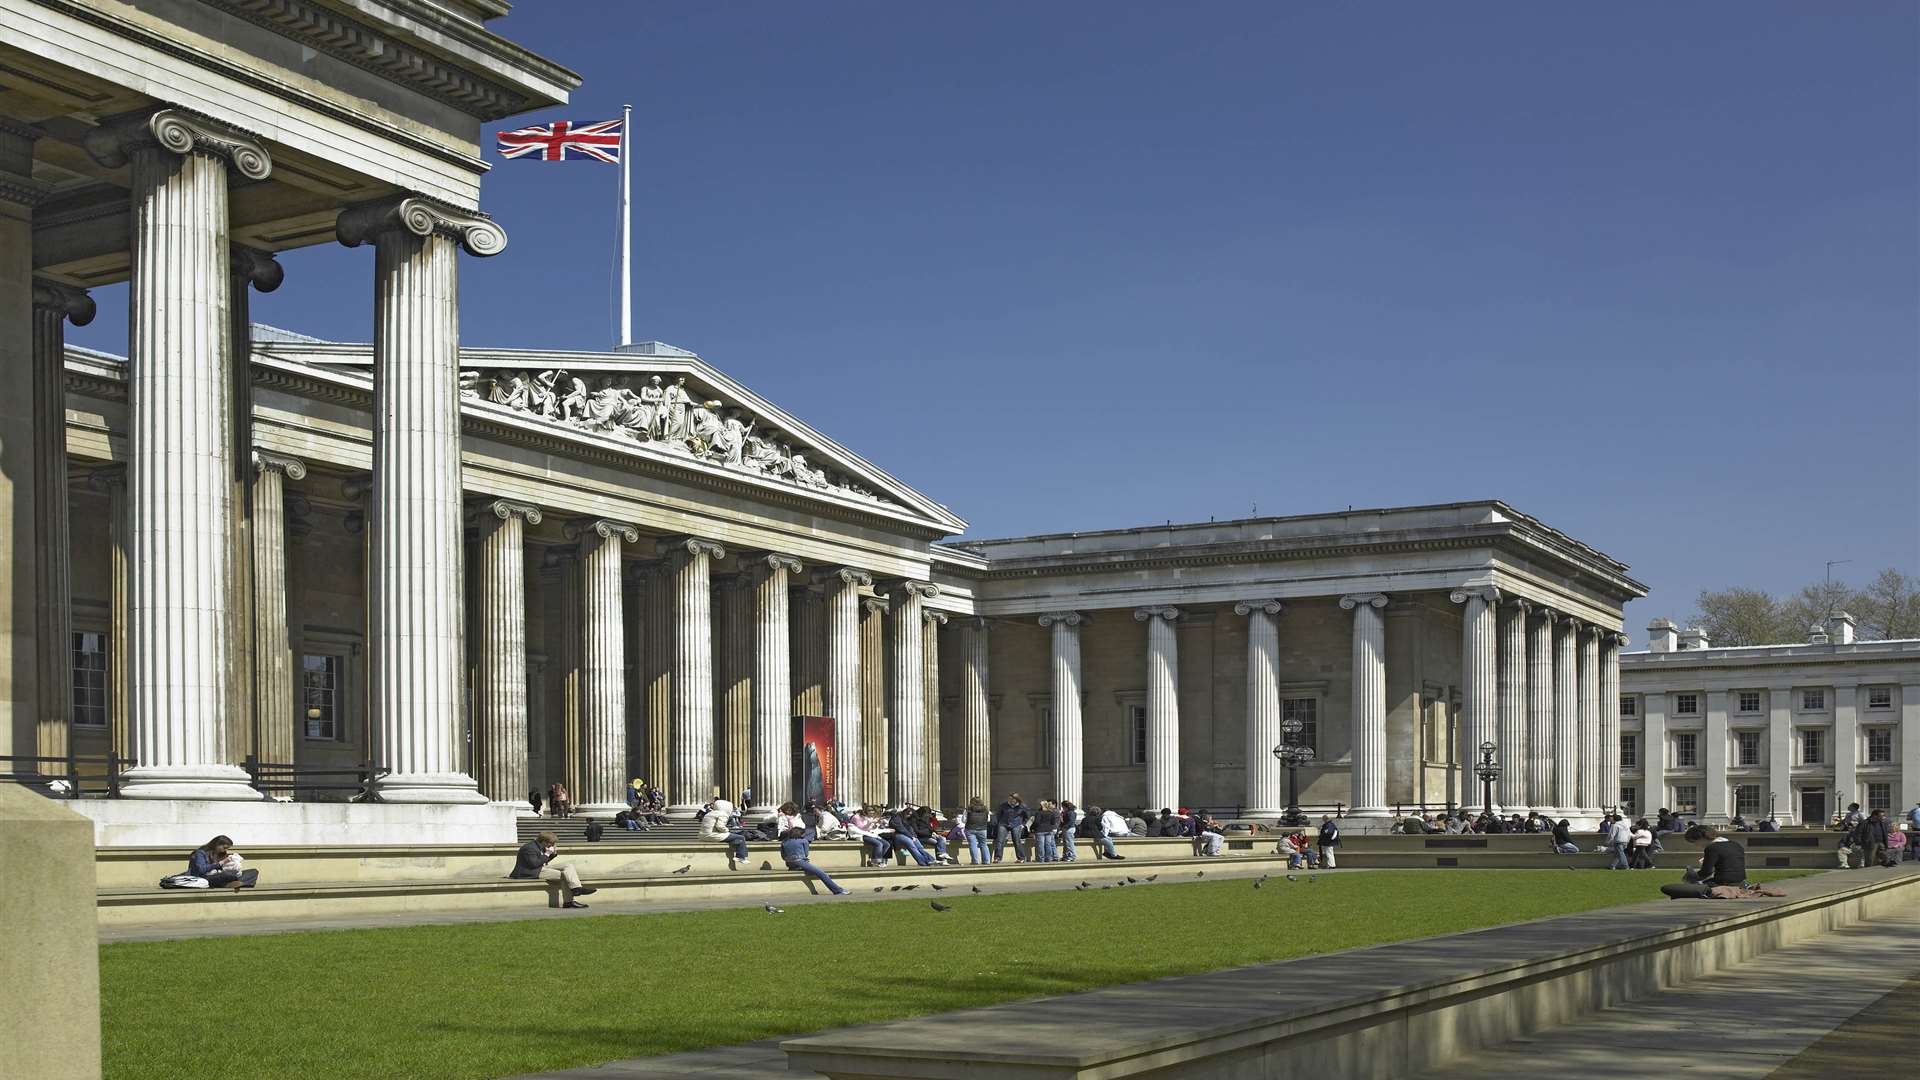 The British Museum is dedicated to human history, art and culture